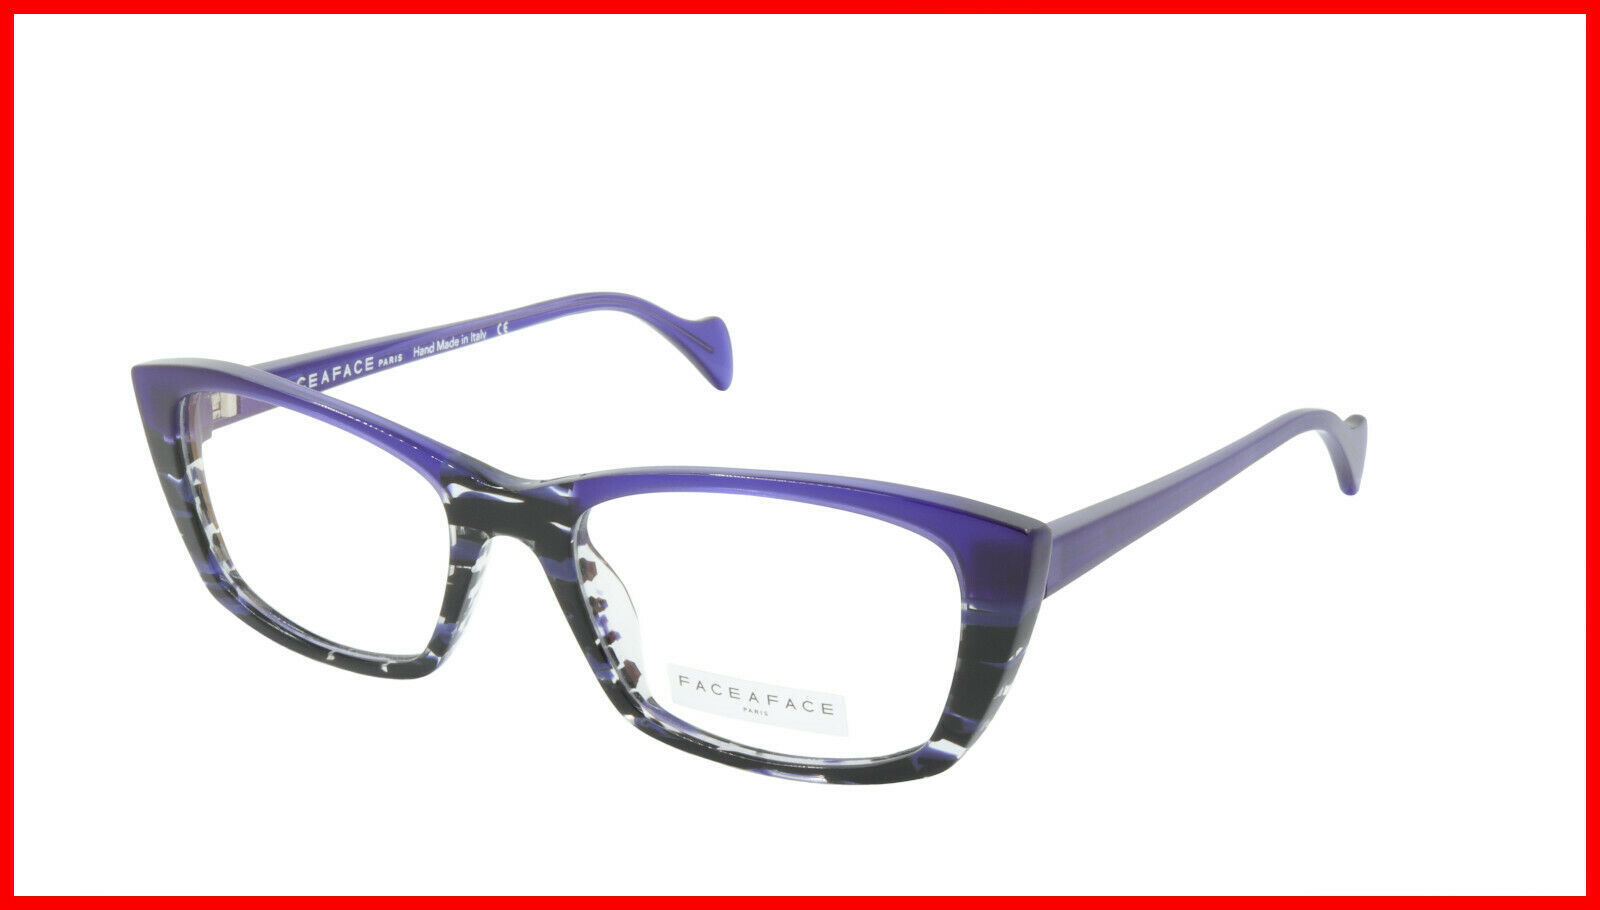 Face A Face Eyeglasses Frame SELMA 2 Col. 2014 Acetate Lines and Blue Light - $316.62